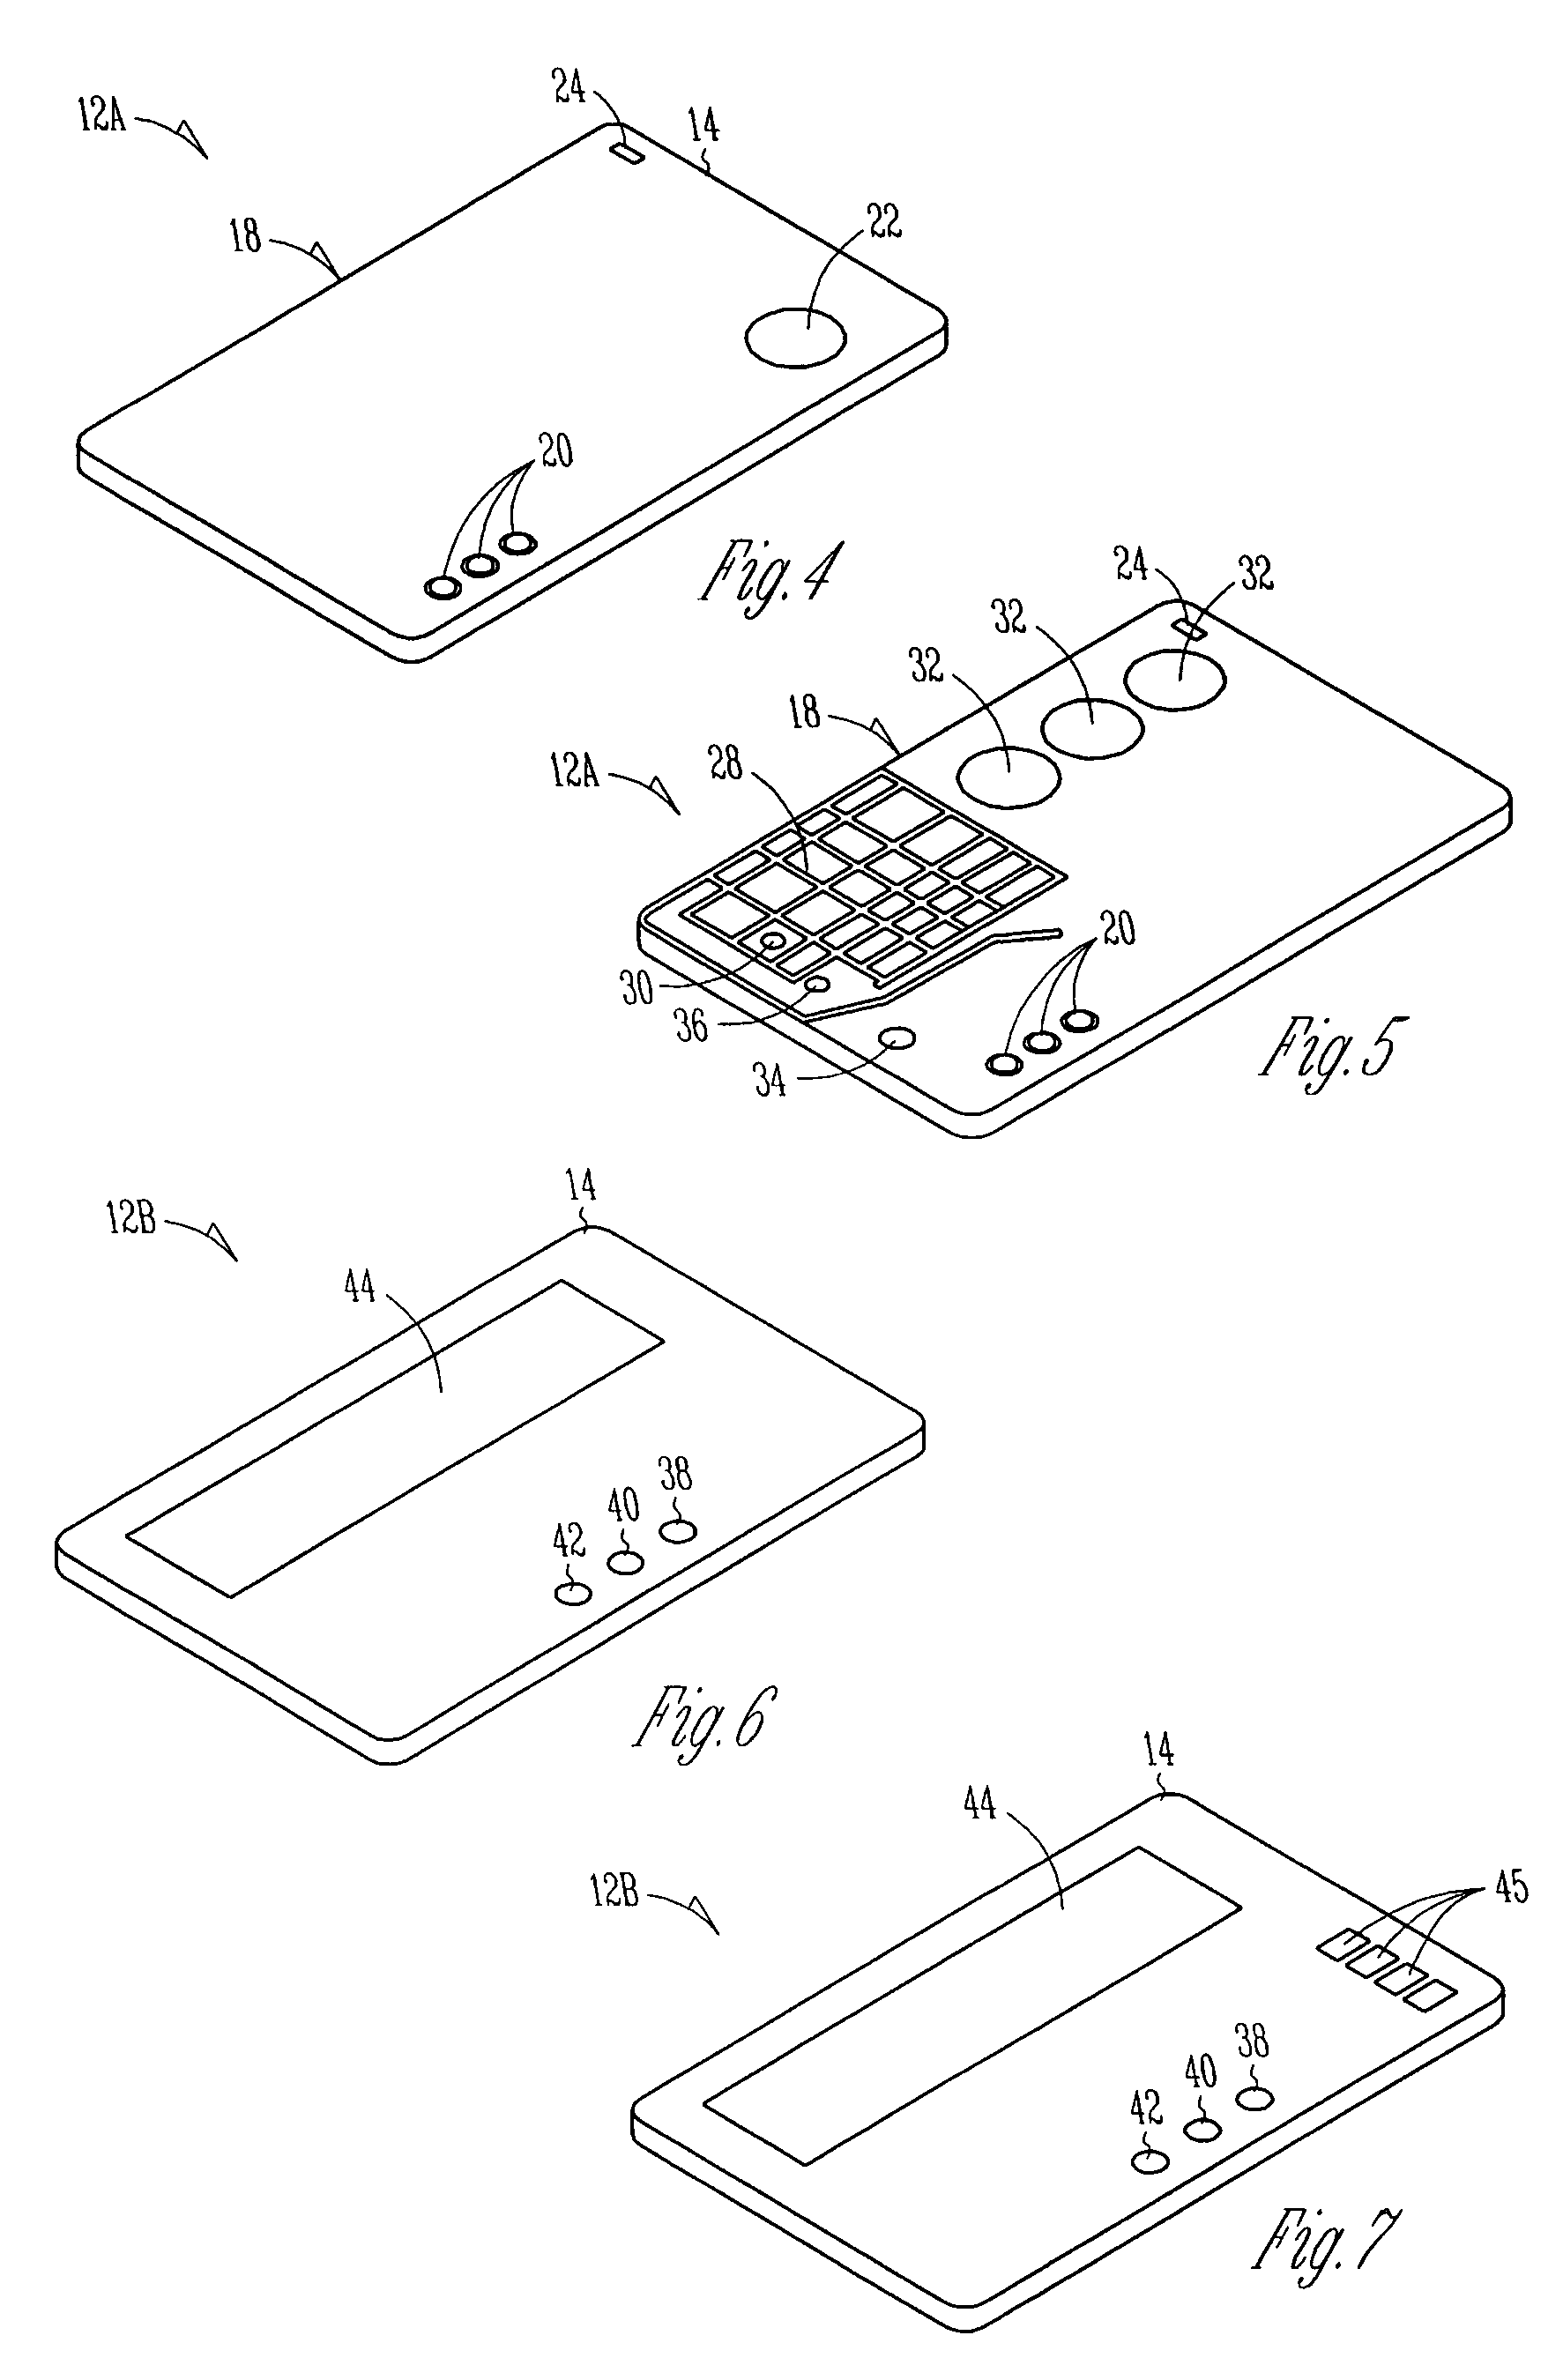 Interactive optical cards and other hand-held devices with increased connectivity